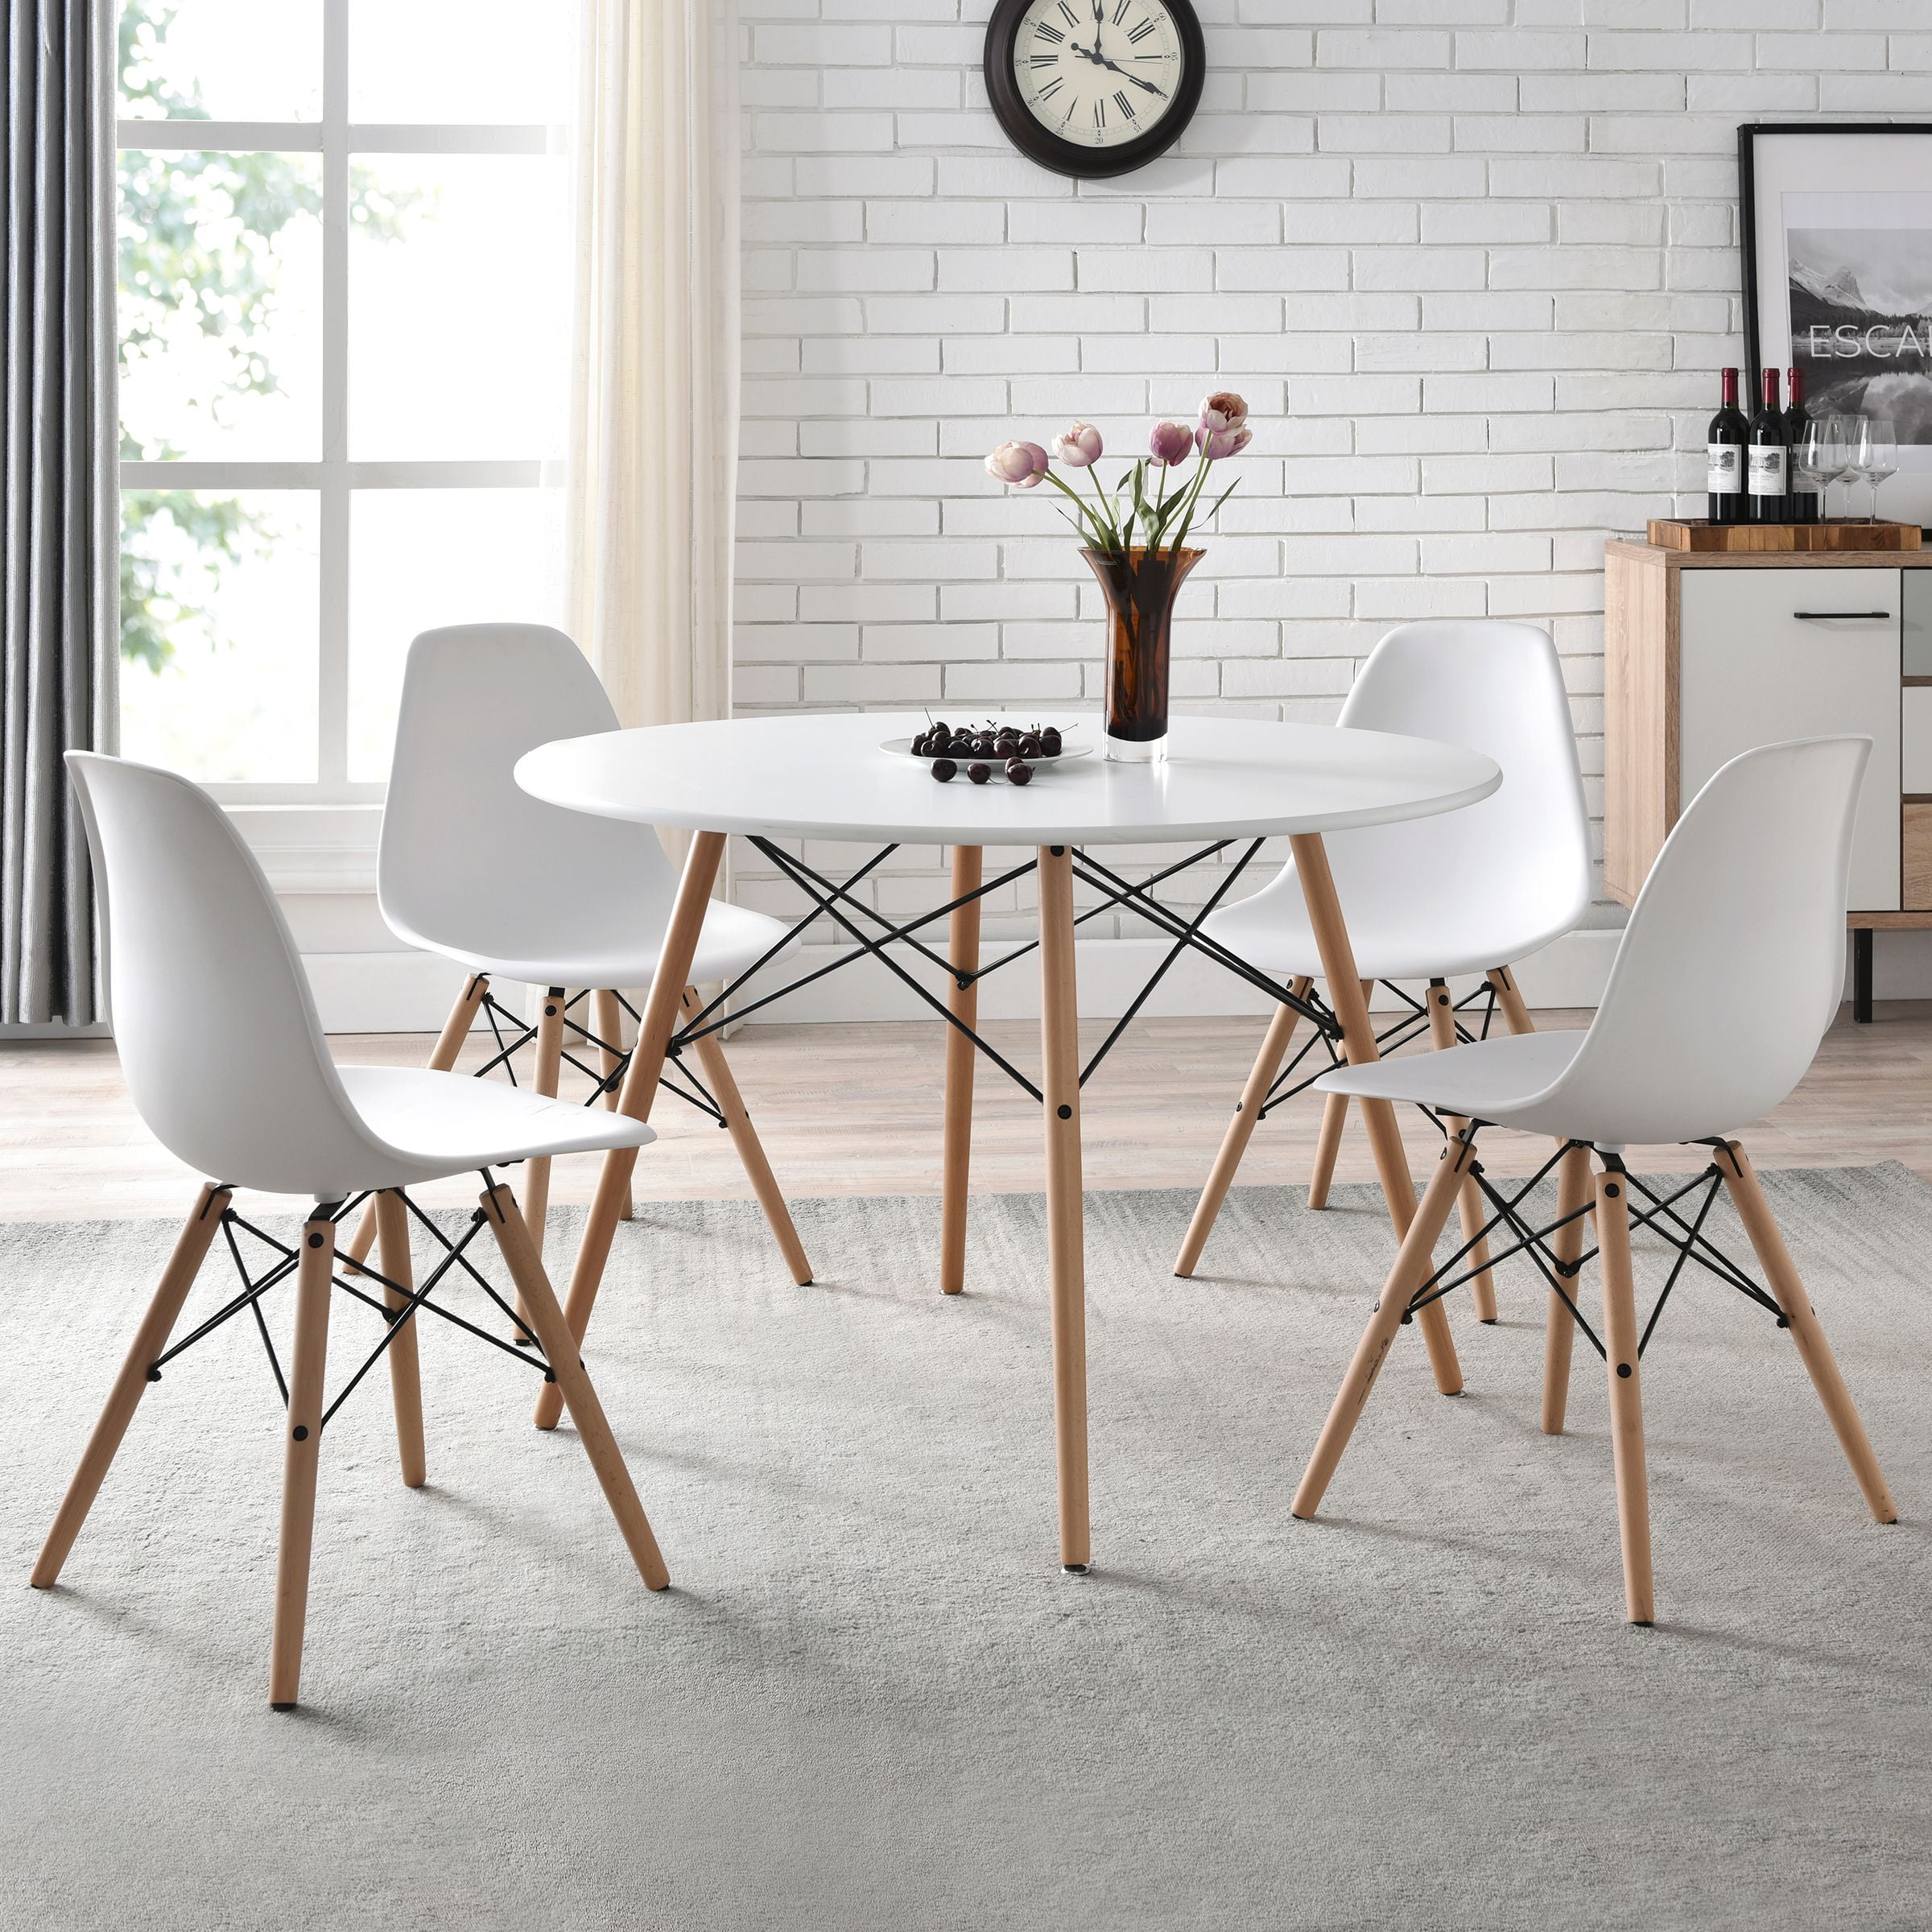 Mainstays Mid-Century Modern Dining Chair, Set of 4, White and Beech Color  - Walmart.com